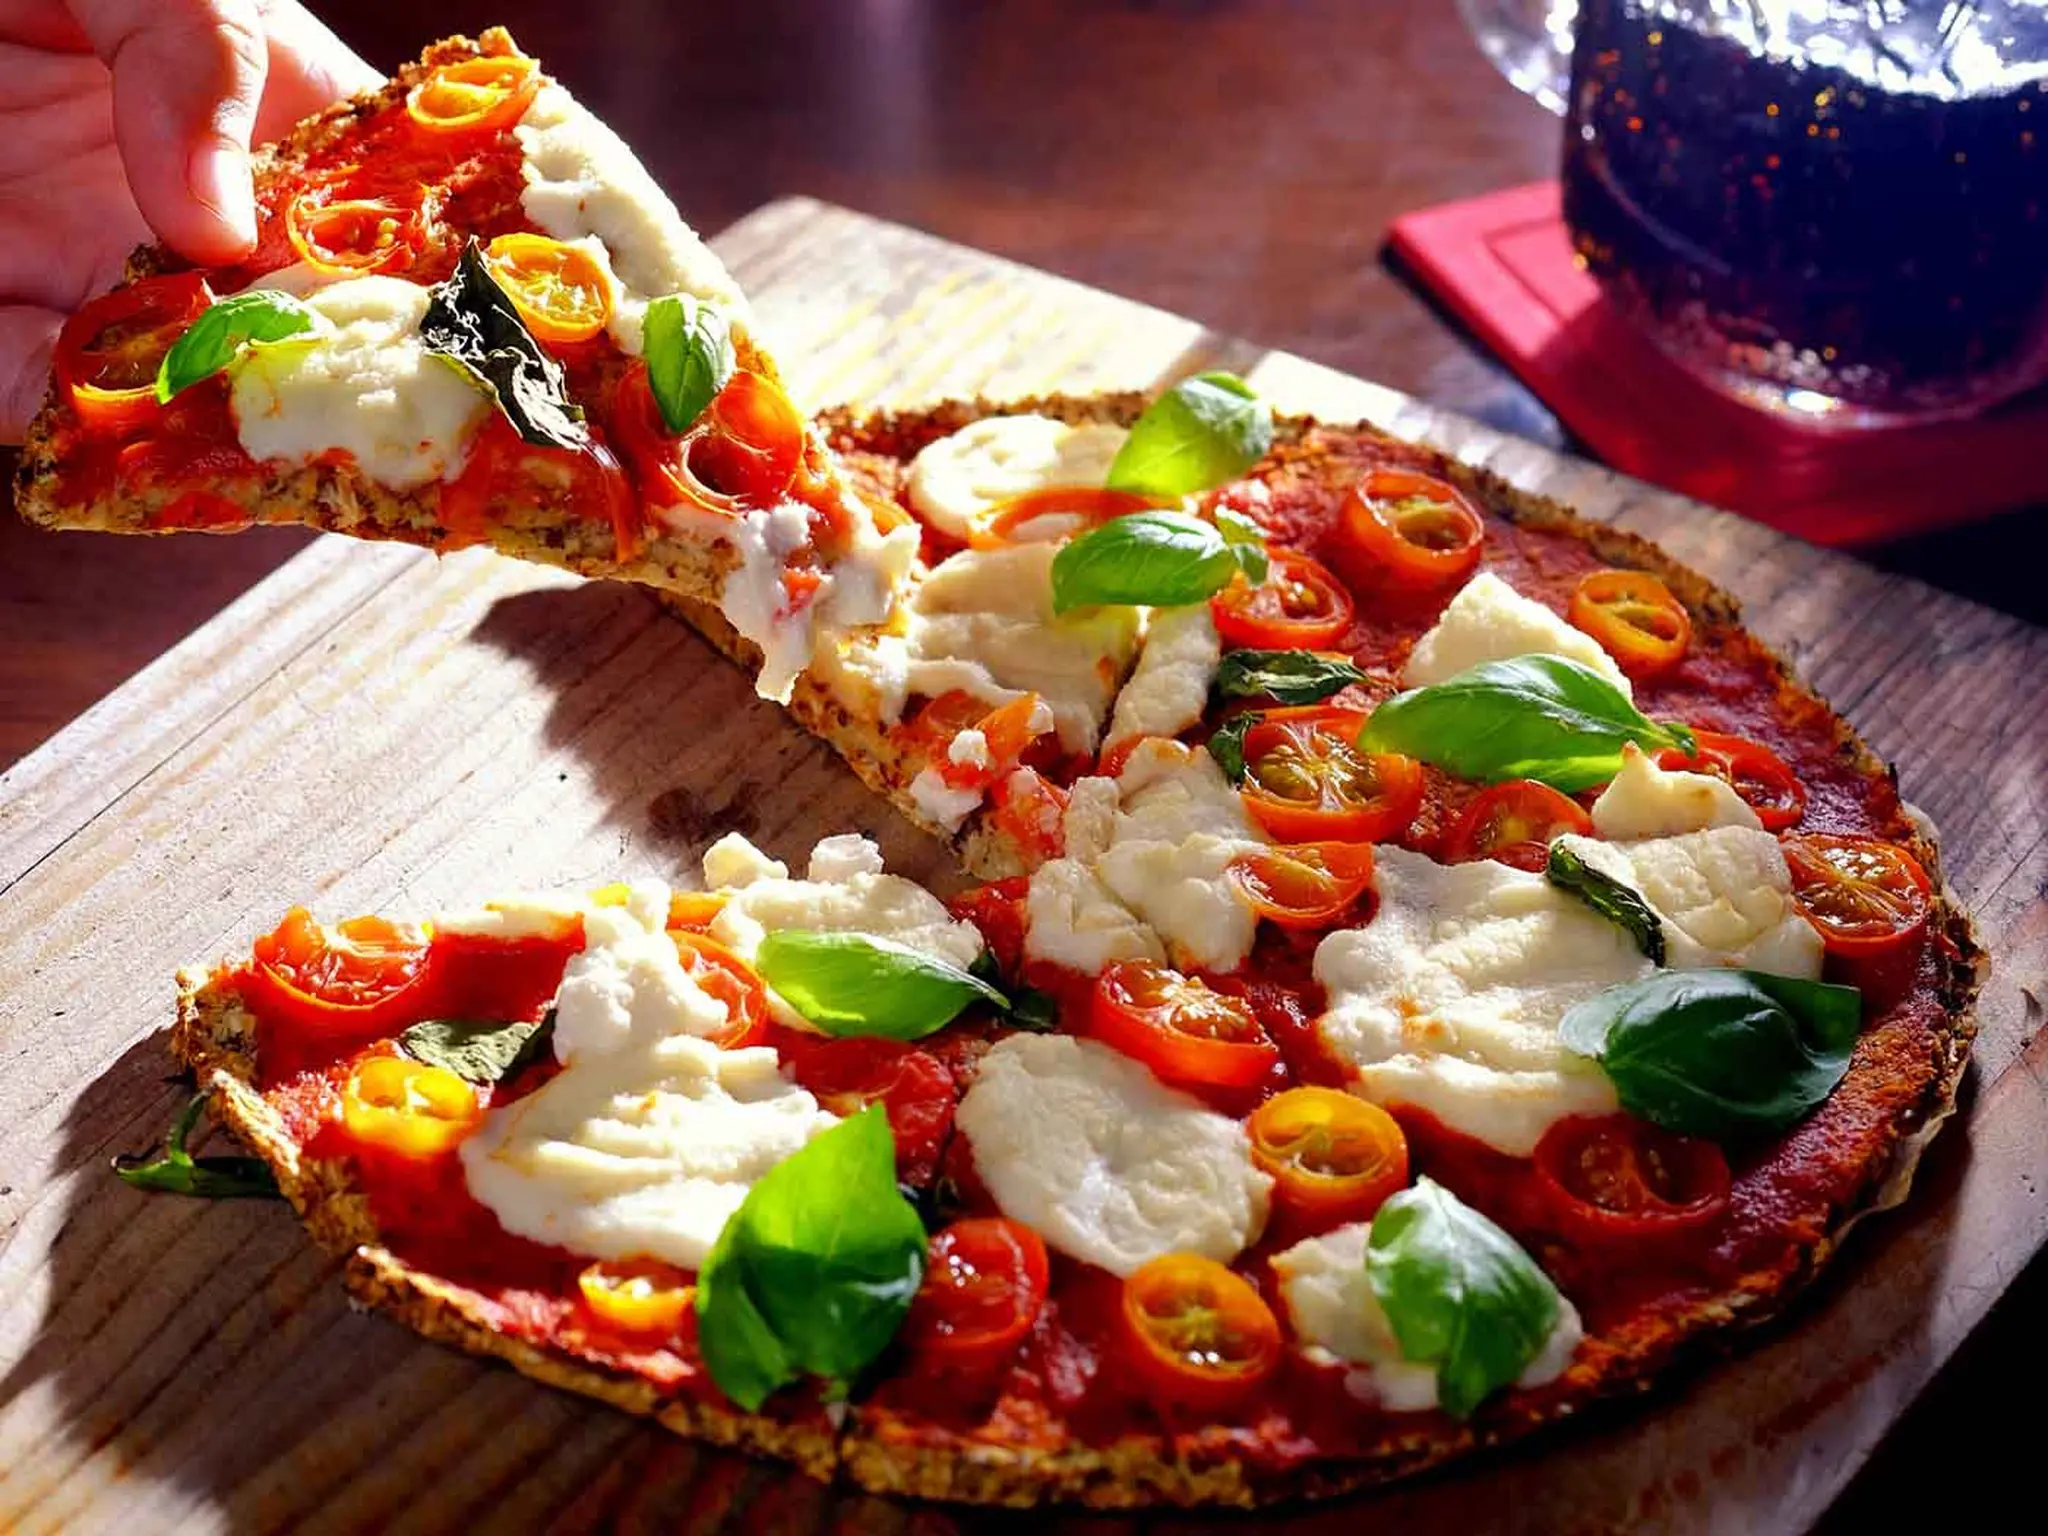 Canada bans some types of vegetarian pizza for health reasons